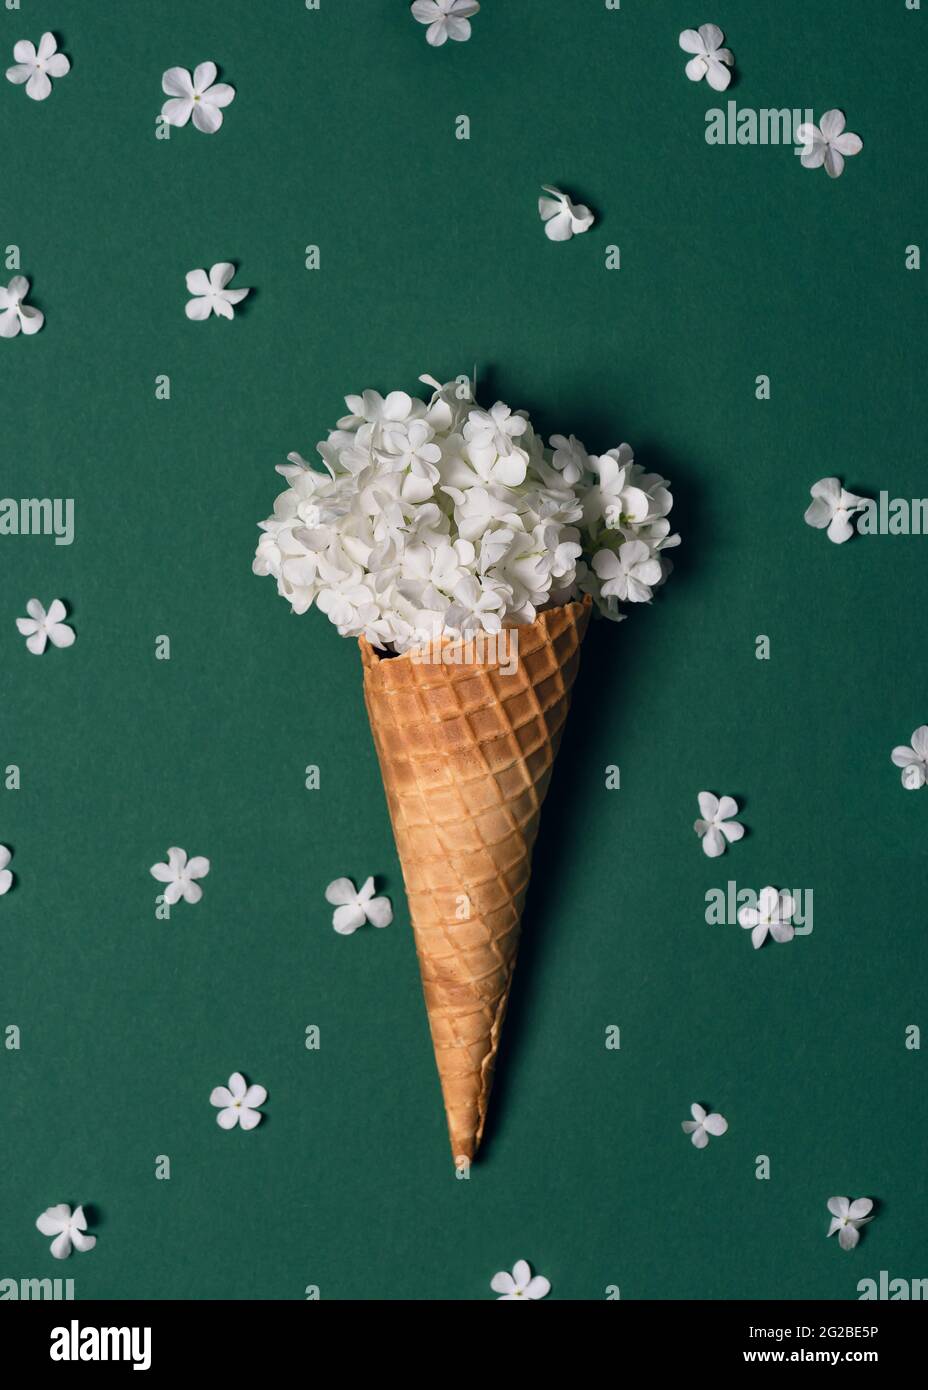 Creative still life of an ice cream waffle cone with white blossom of Snowball on green background. Stock Photo